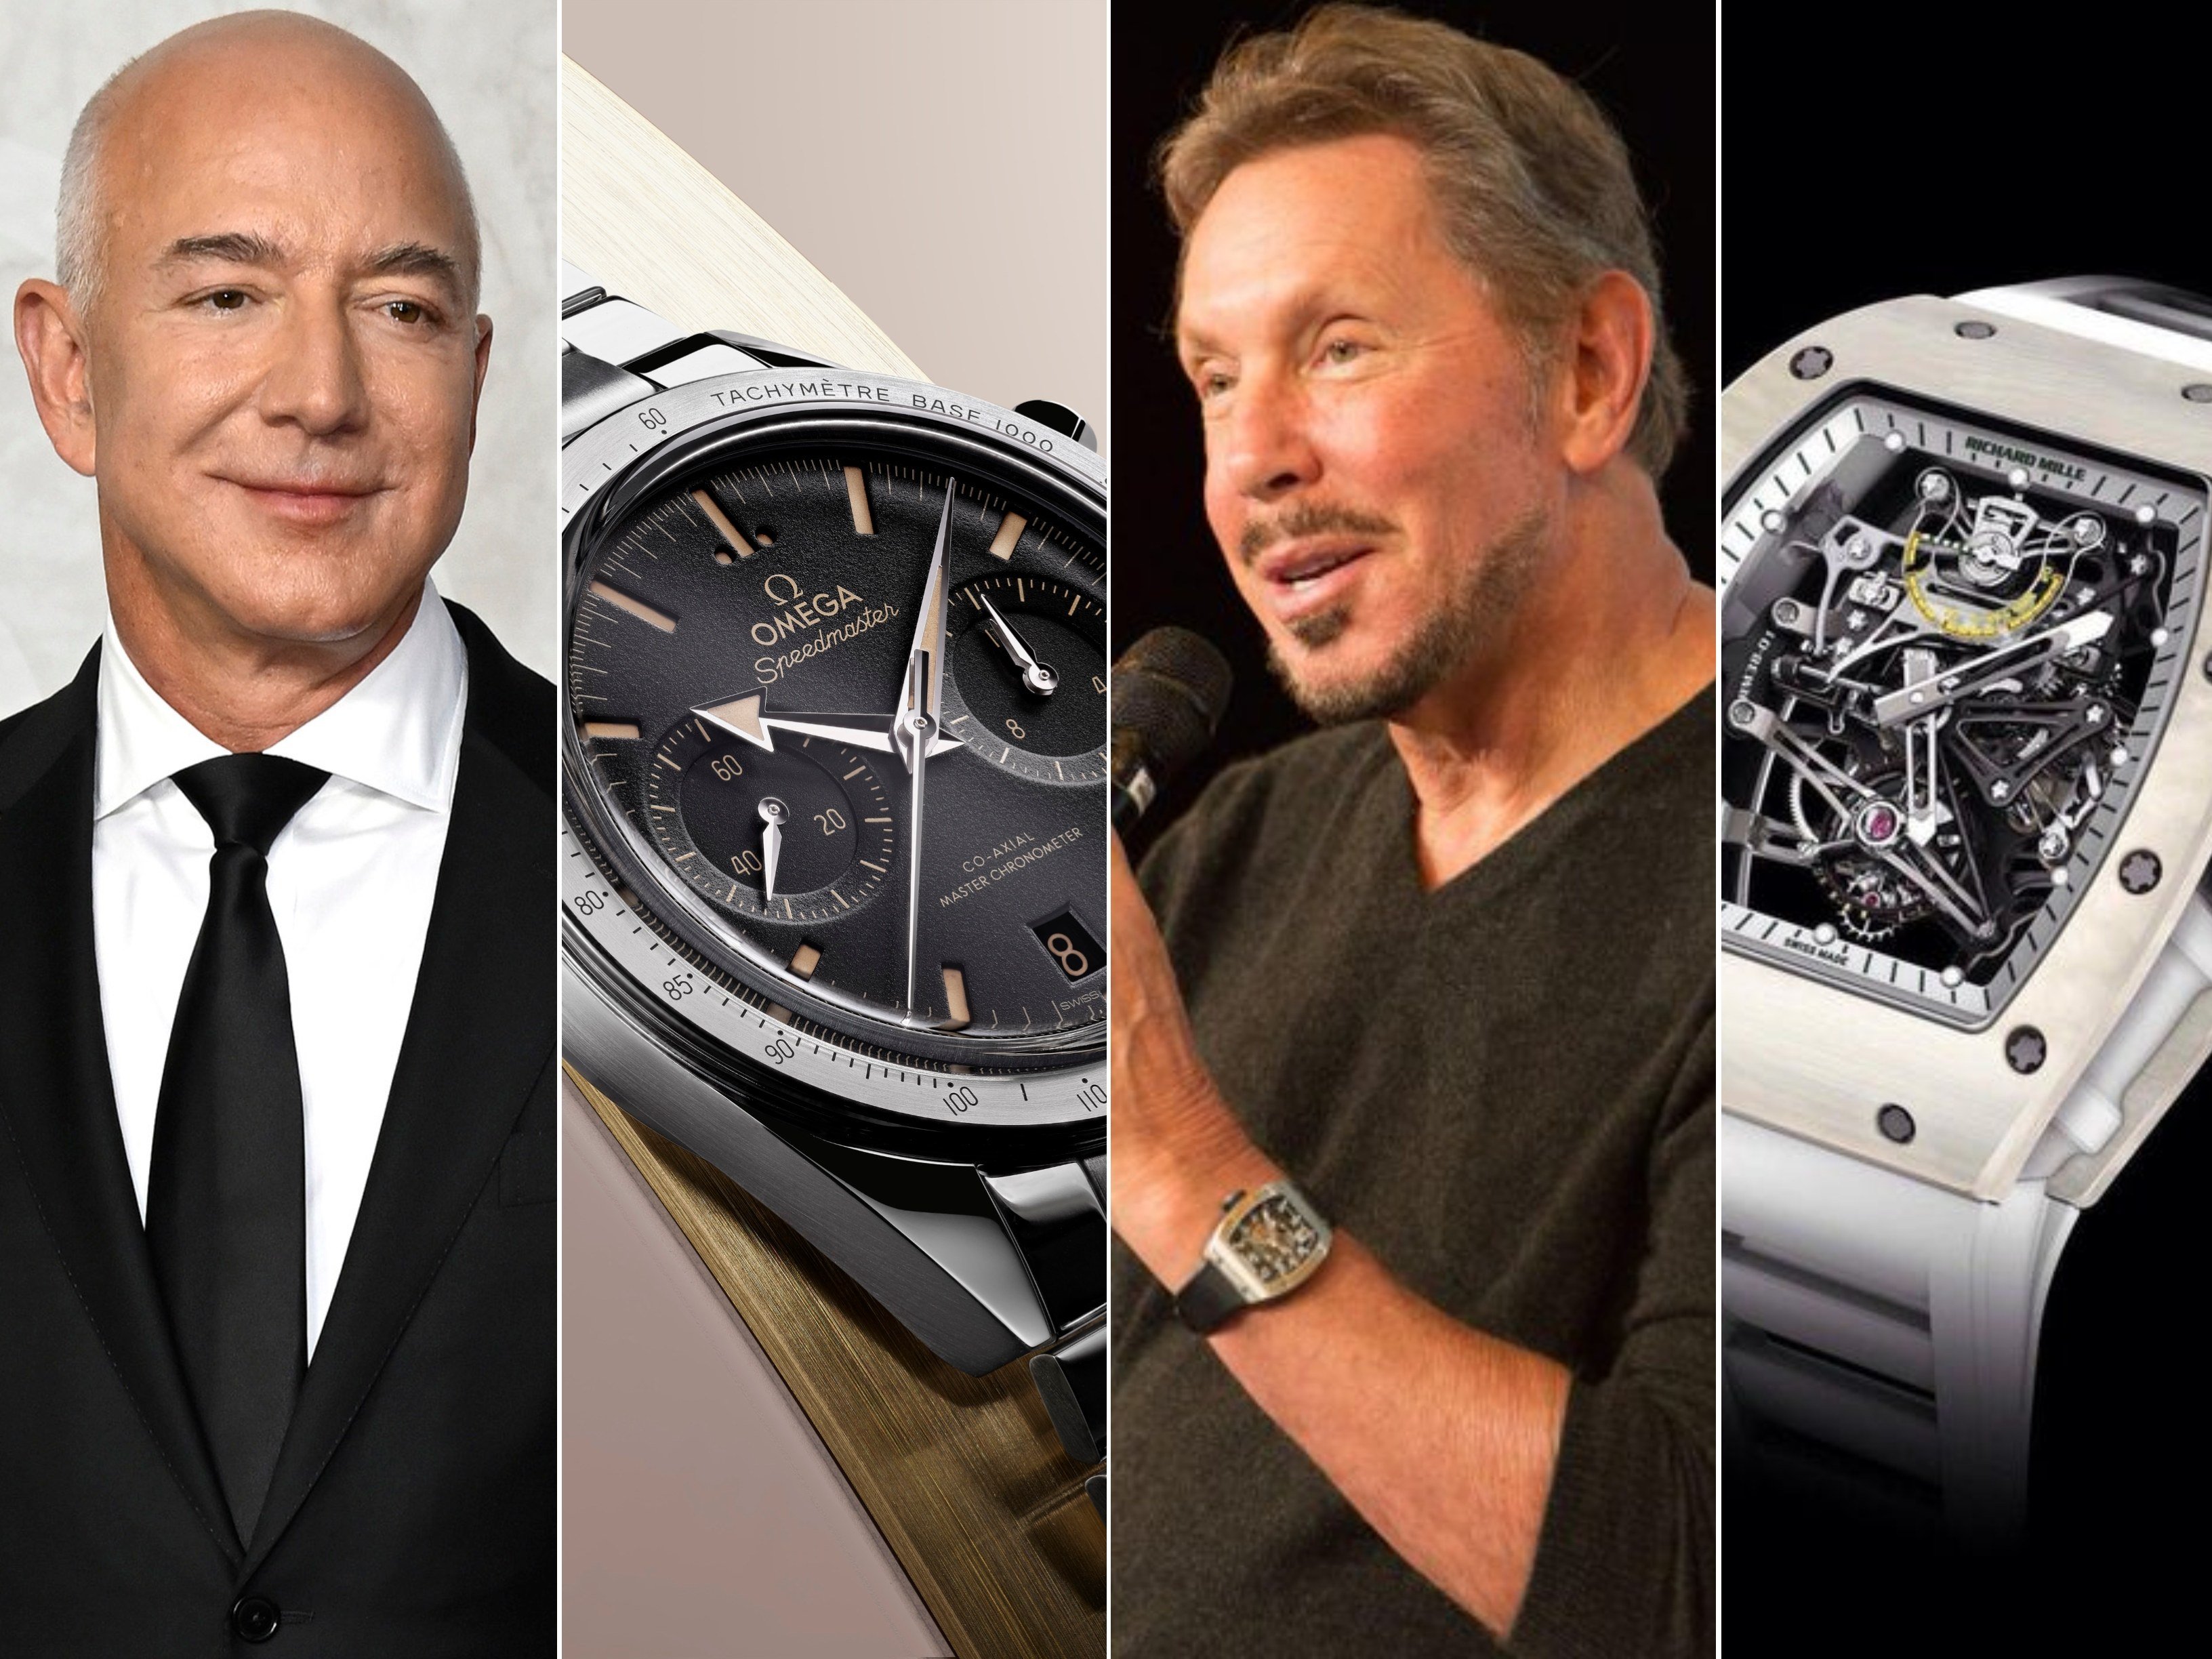 Silicon Valley watch statements, from Jeff Bezos and Omega to Larry Ellison and Richard Mille. Photos: TNS, Richard Mille, Omega, @OracleCloud/Twitter